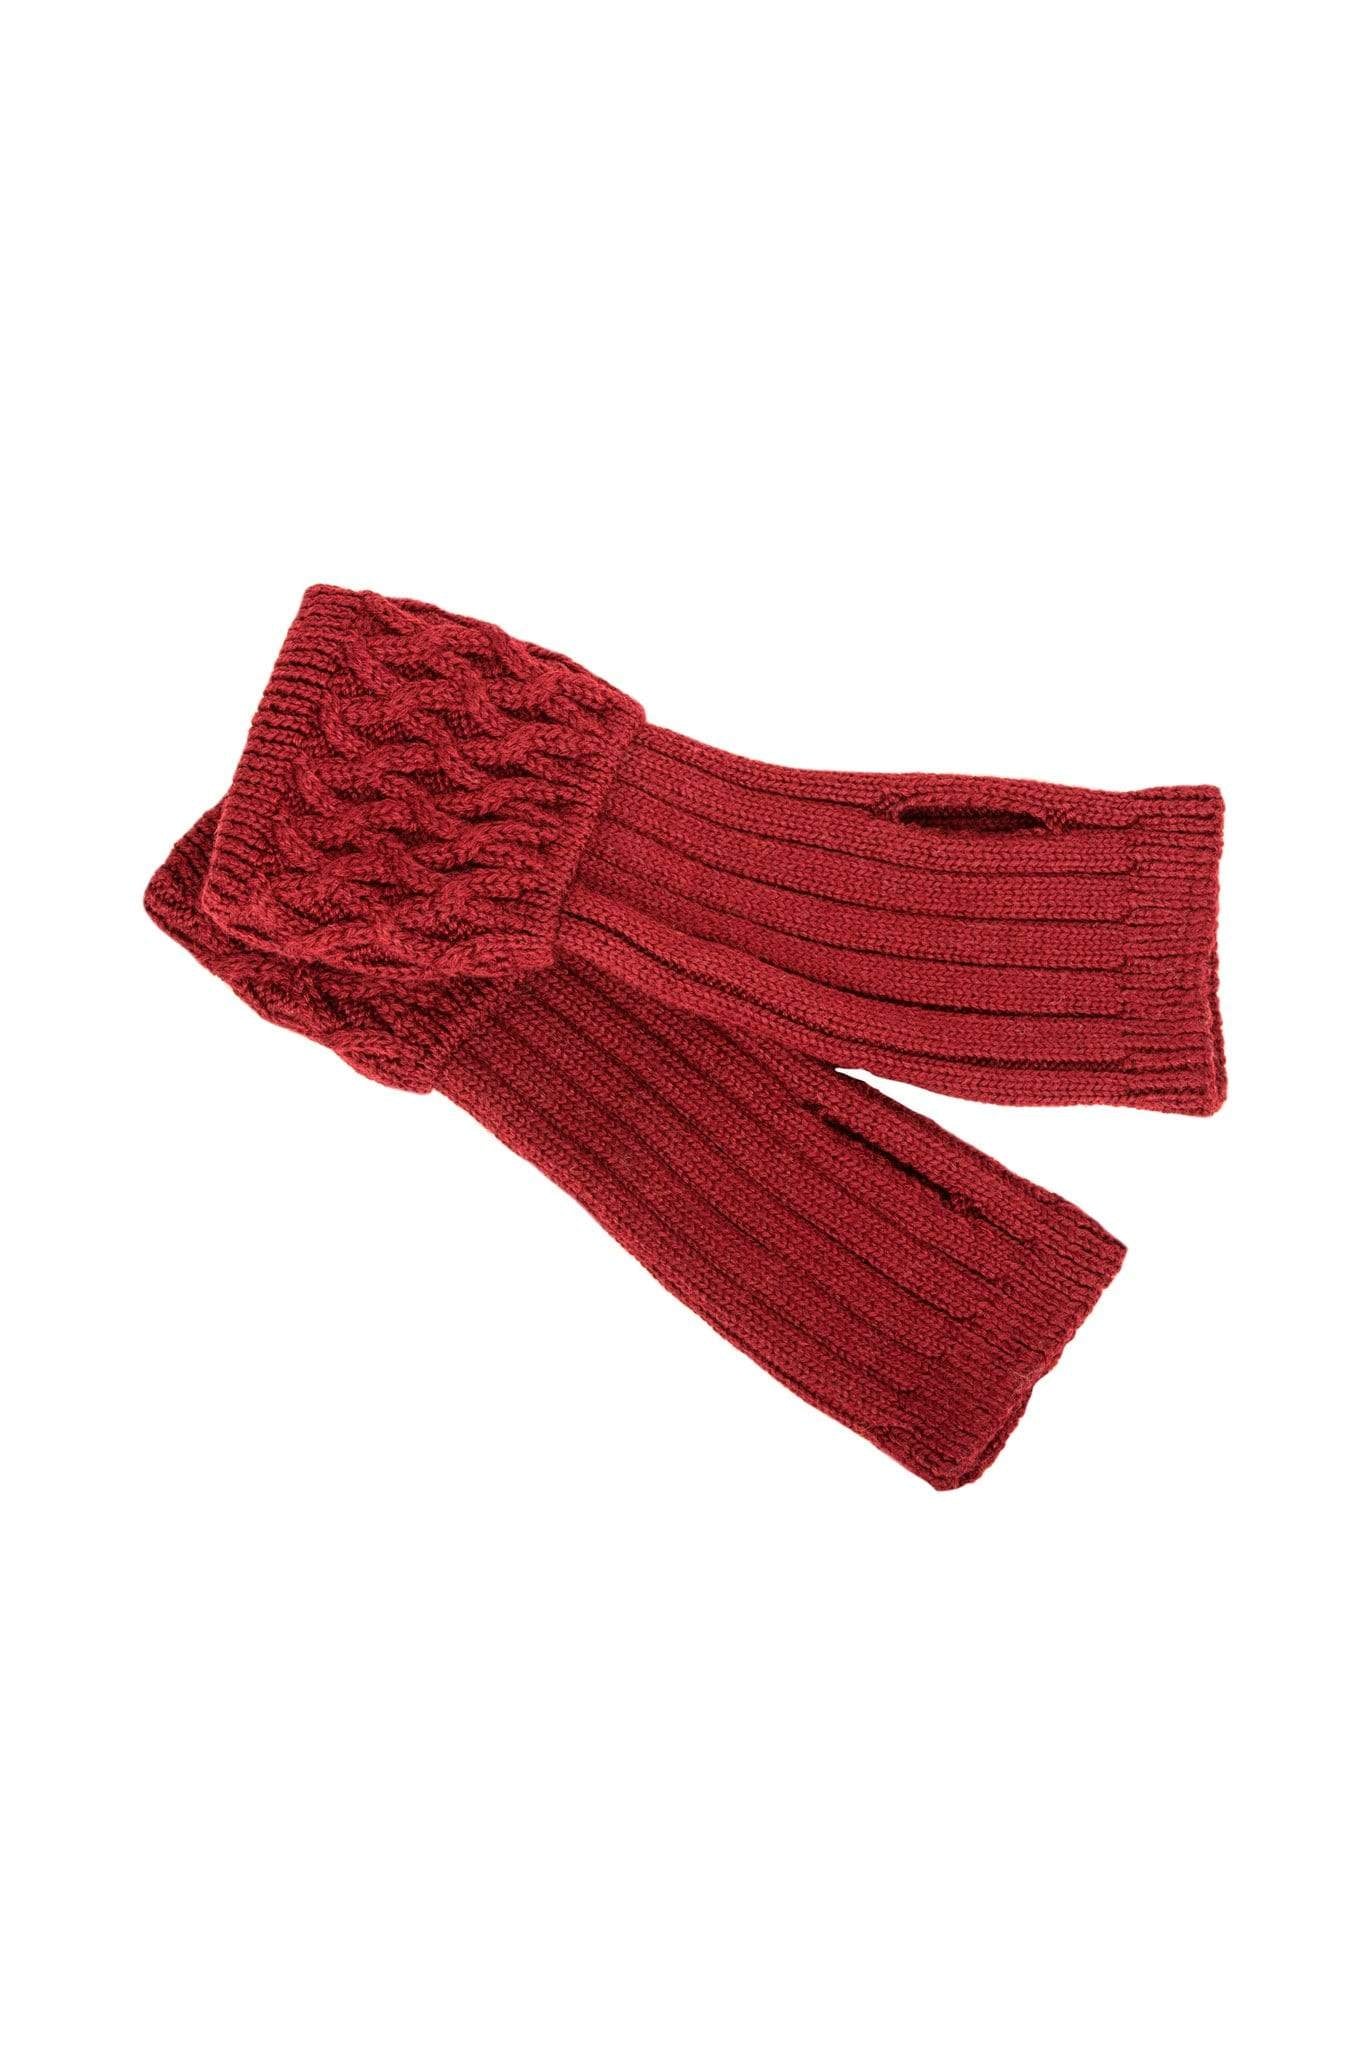 House of Cheviot Gloves House of Cheviot Ladies Wrist Warmers Burgundy